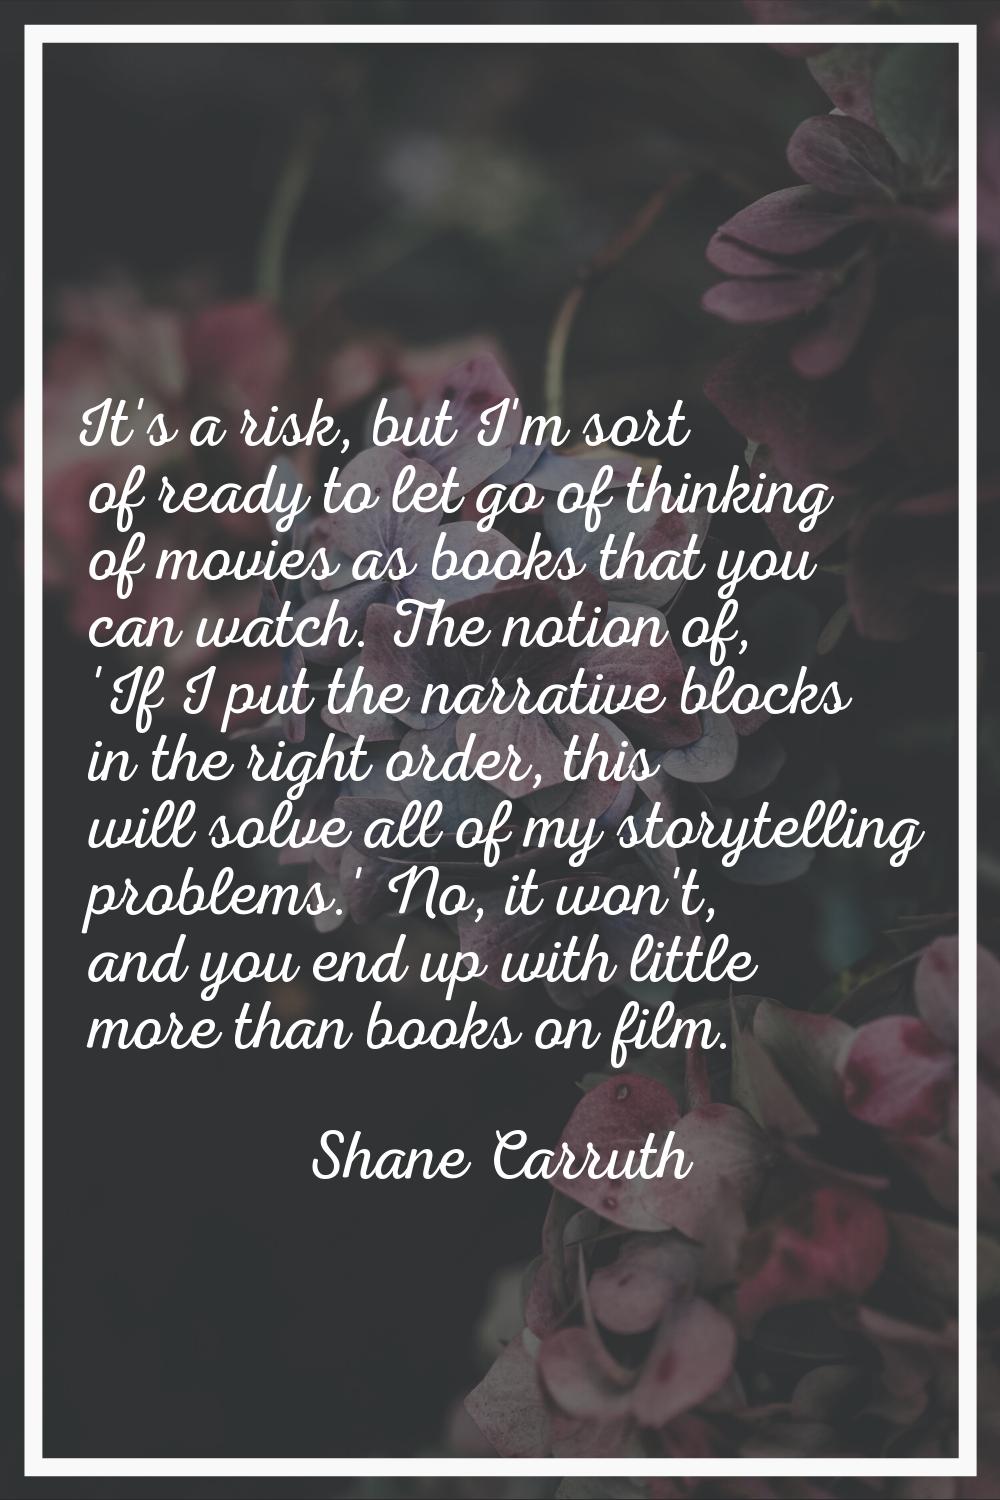 It's a risk, but I'm sort of ready to let go of thinking of movies as books that you can watch. The